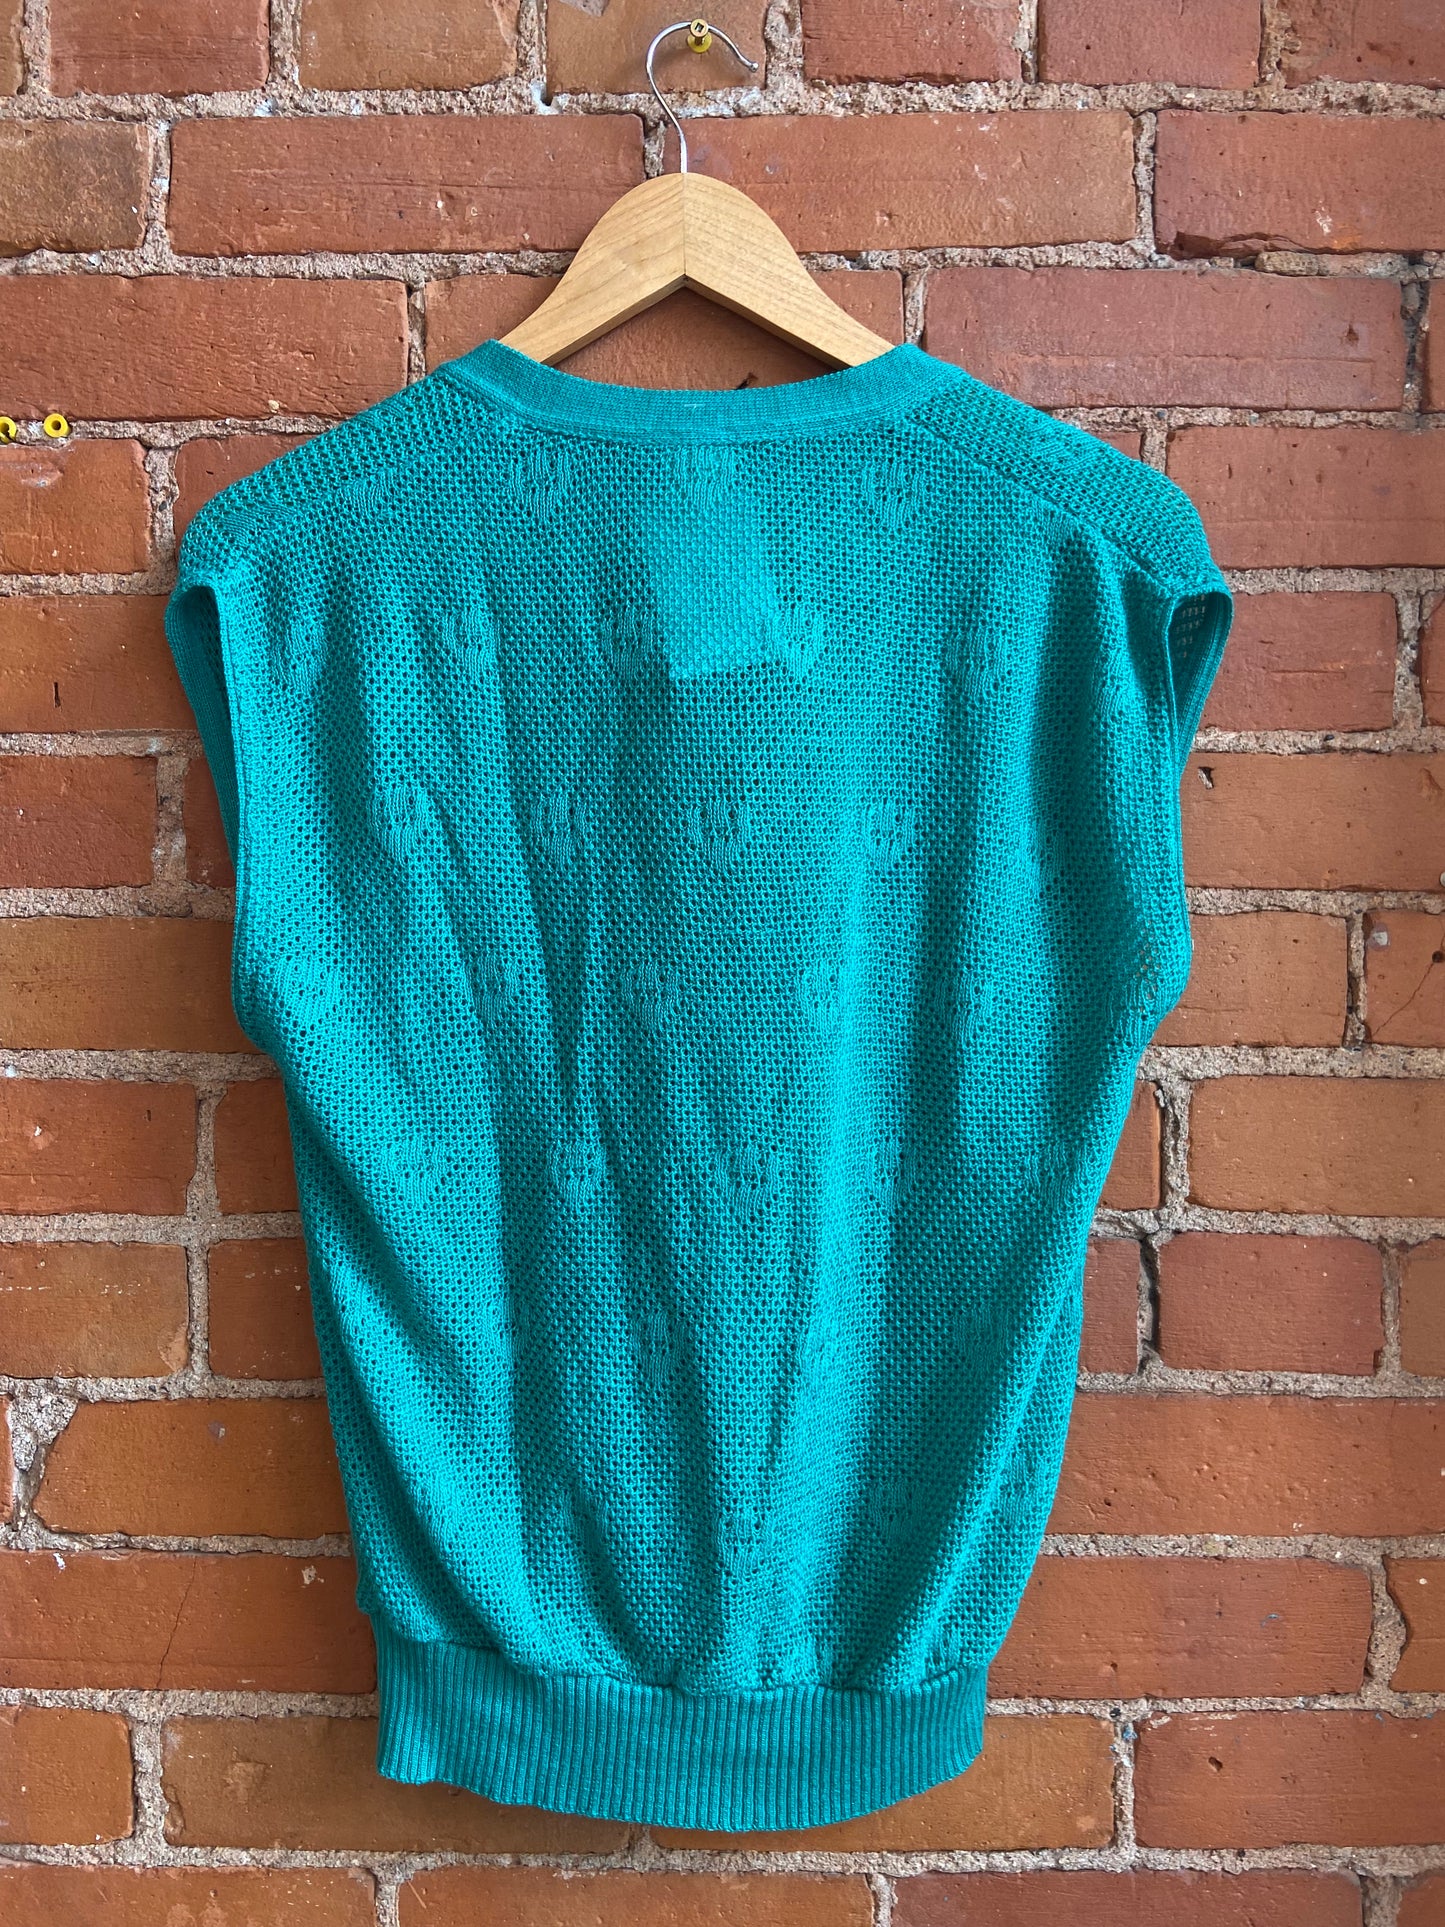 Teal Button up Sweater Vest